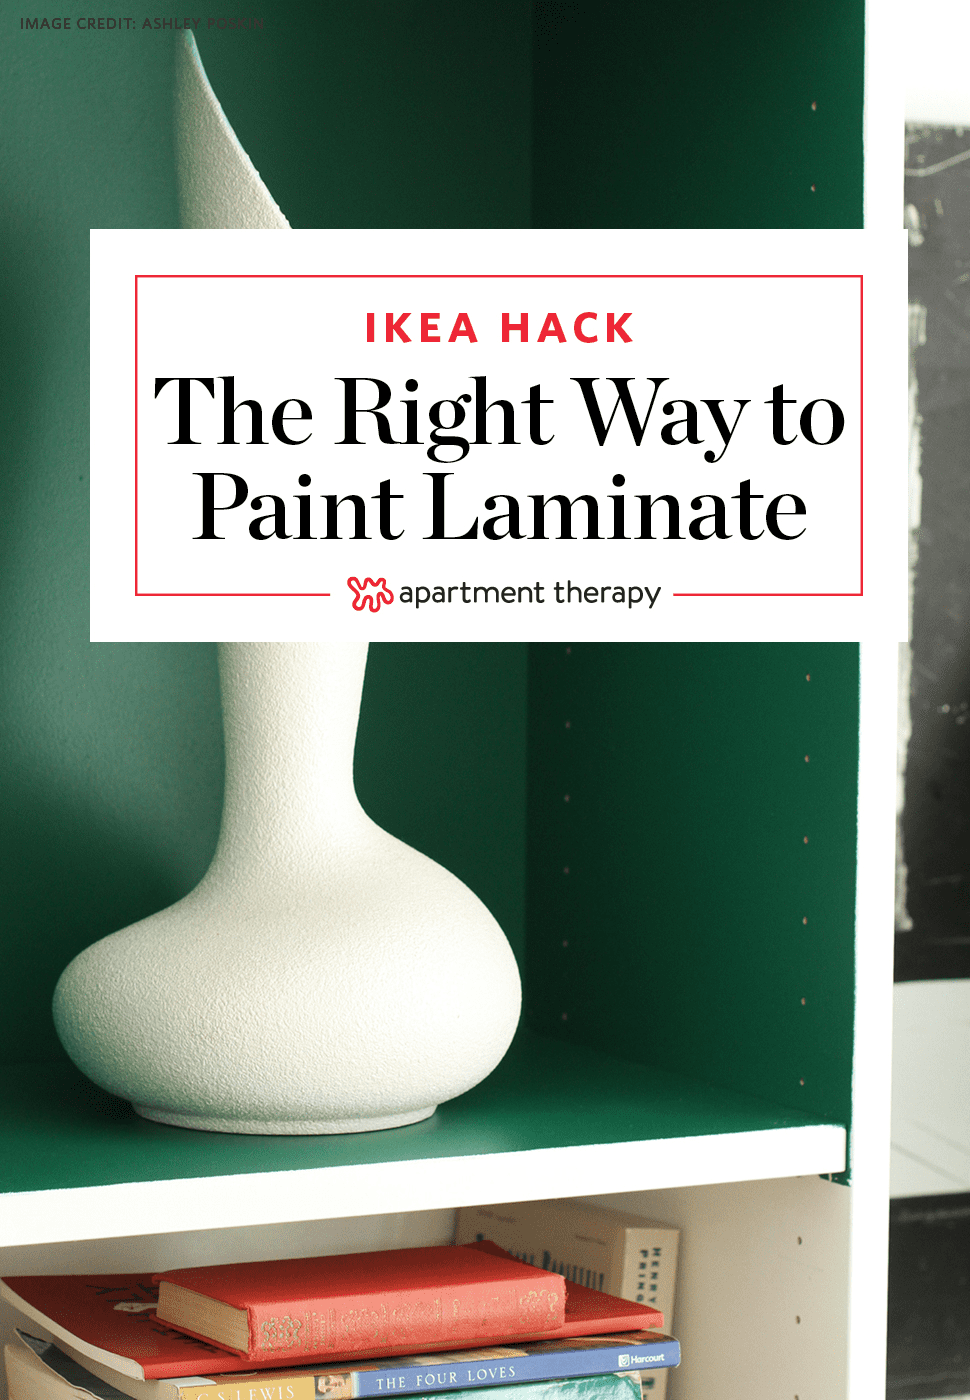 Paint Touch Up for Your Ikea Furniture: A New Product Review